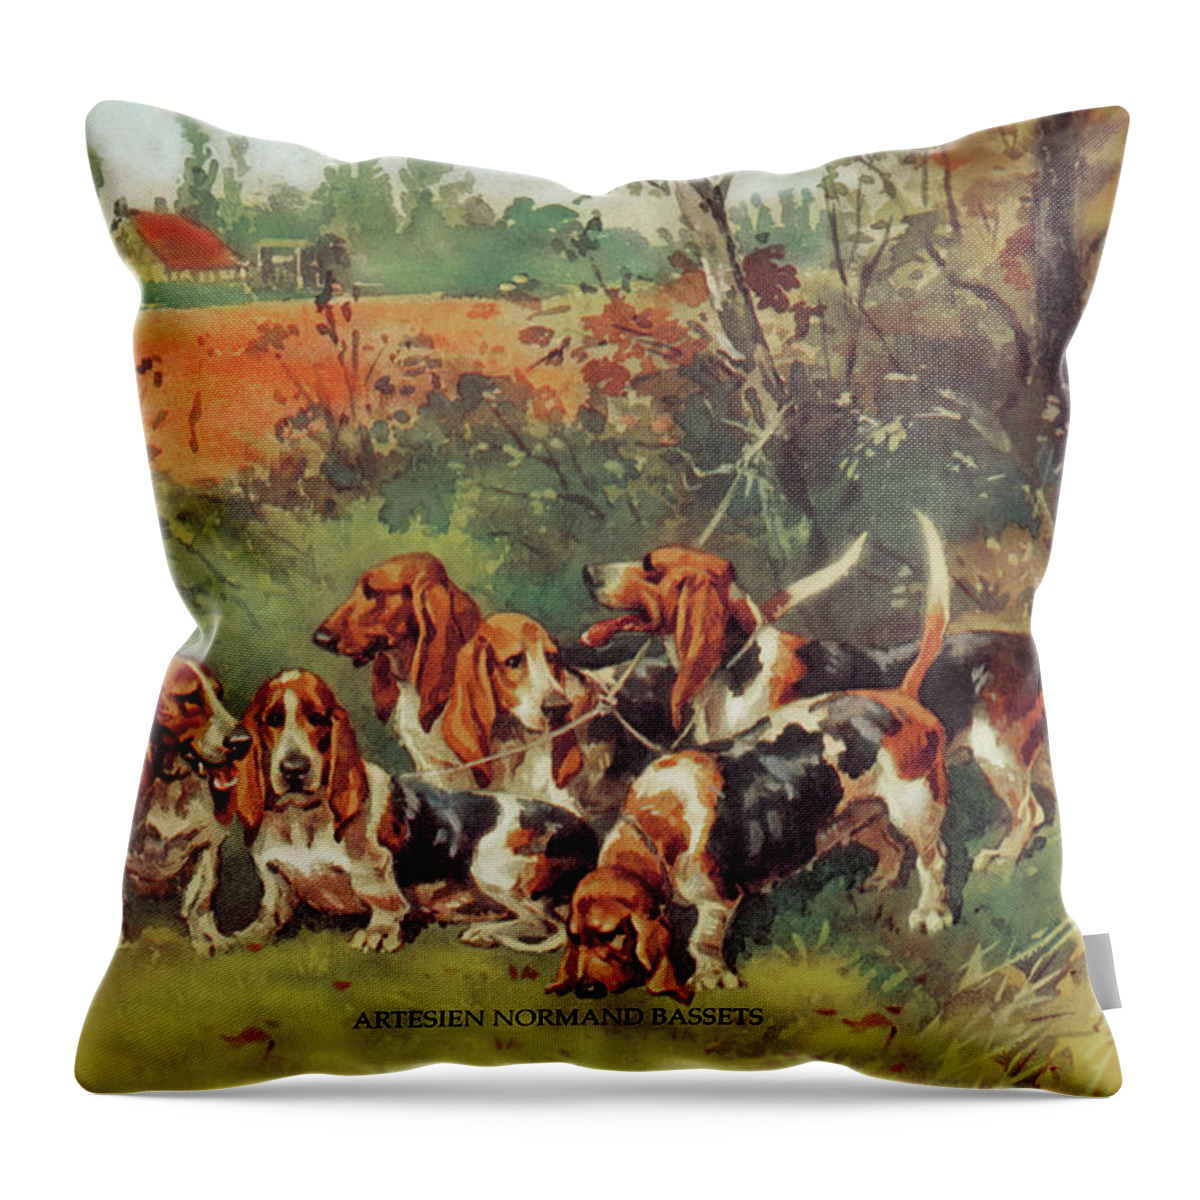 Dogs Throw Pillow featuring the painting Artesien Normand Bassets by Baron Karl Reille